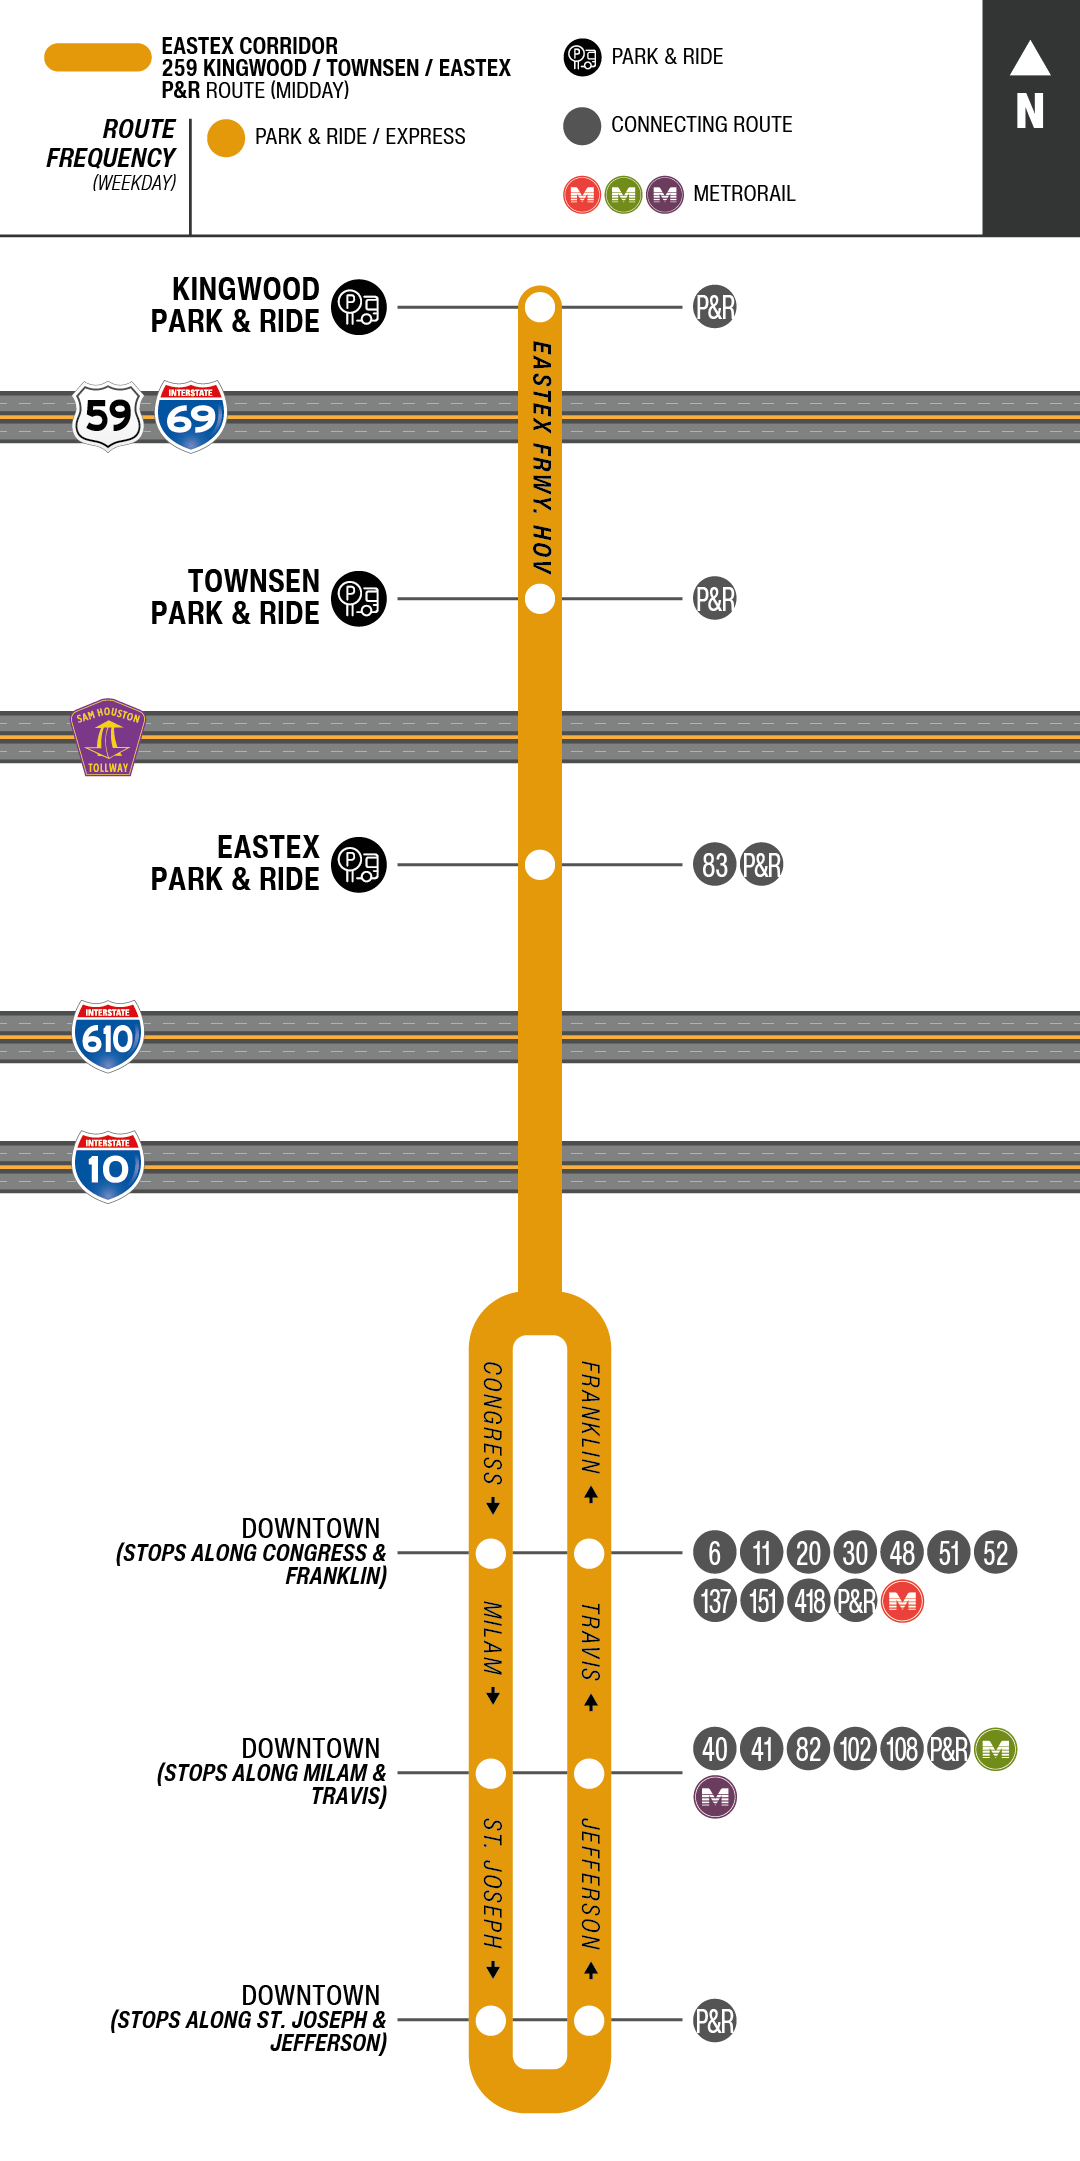 Route map for 259 Kingwood / Townsen / Eastex Park & Ride bus